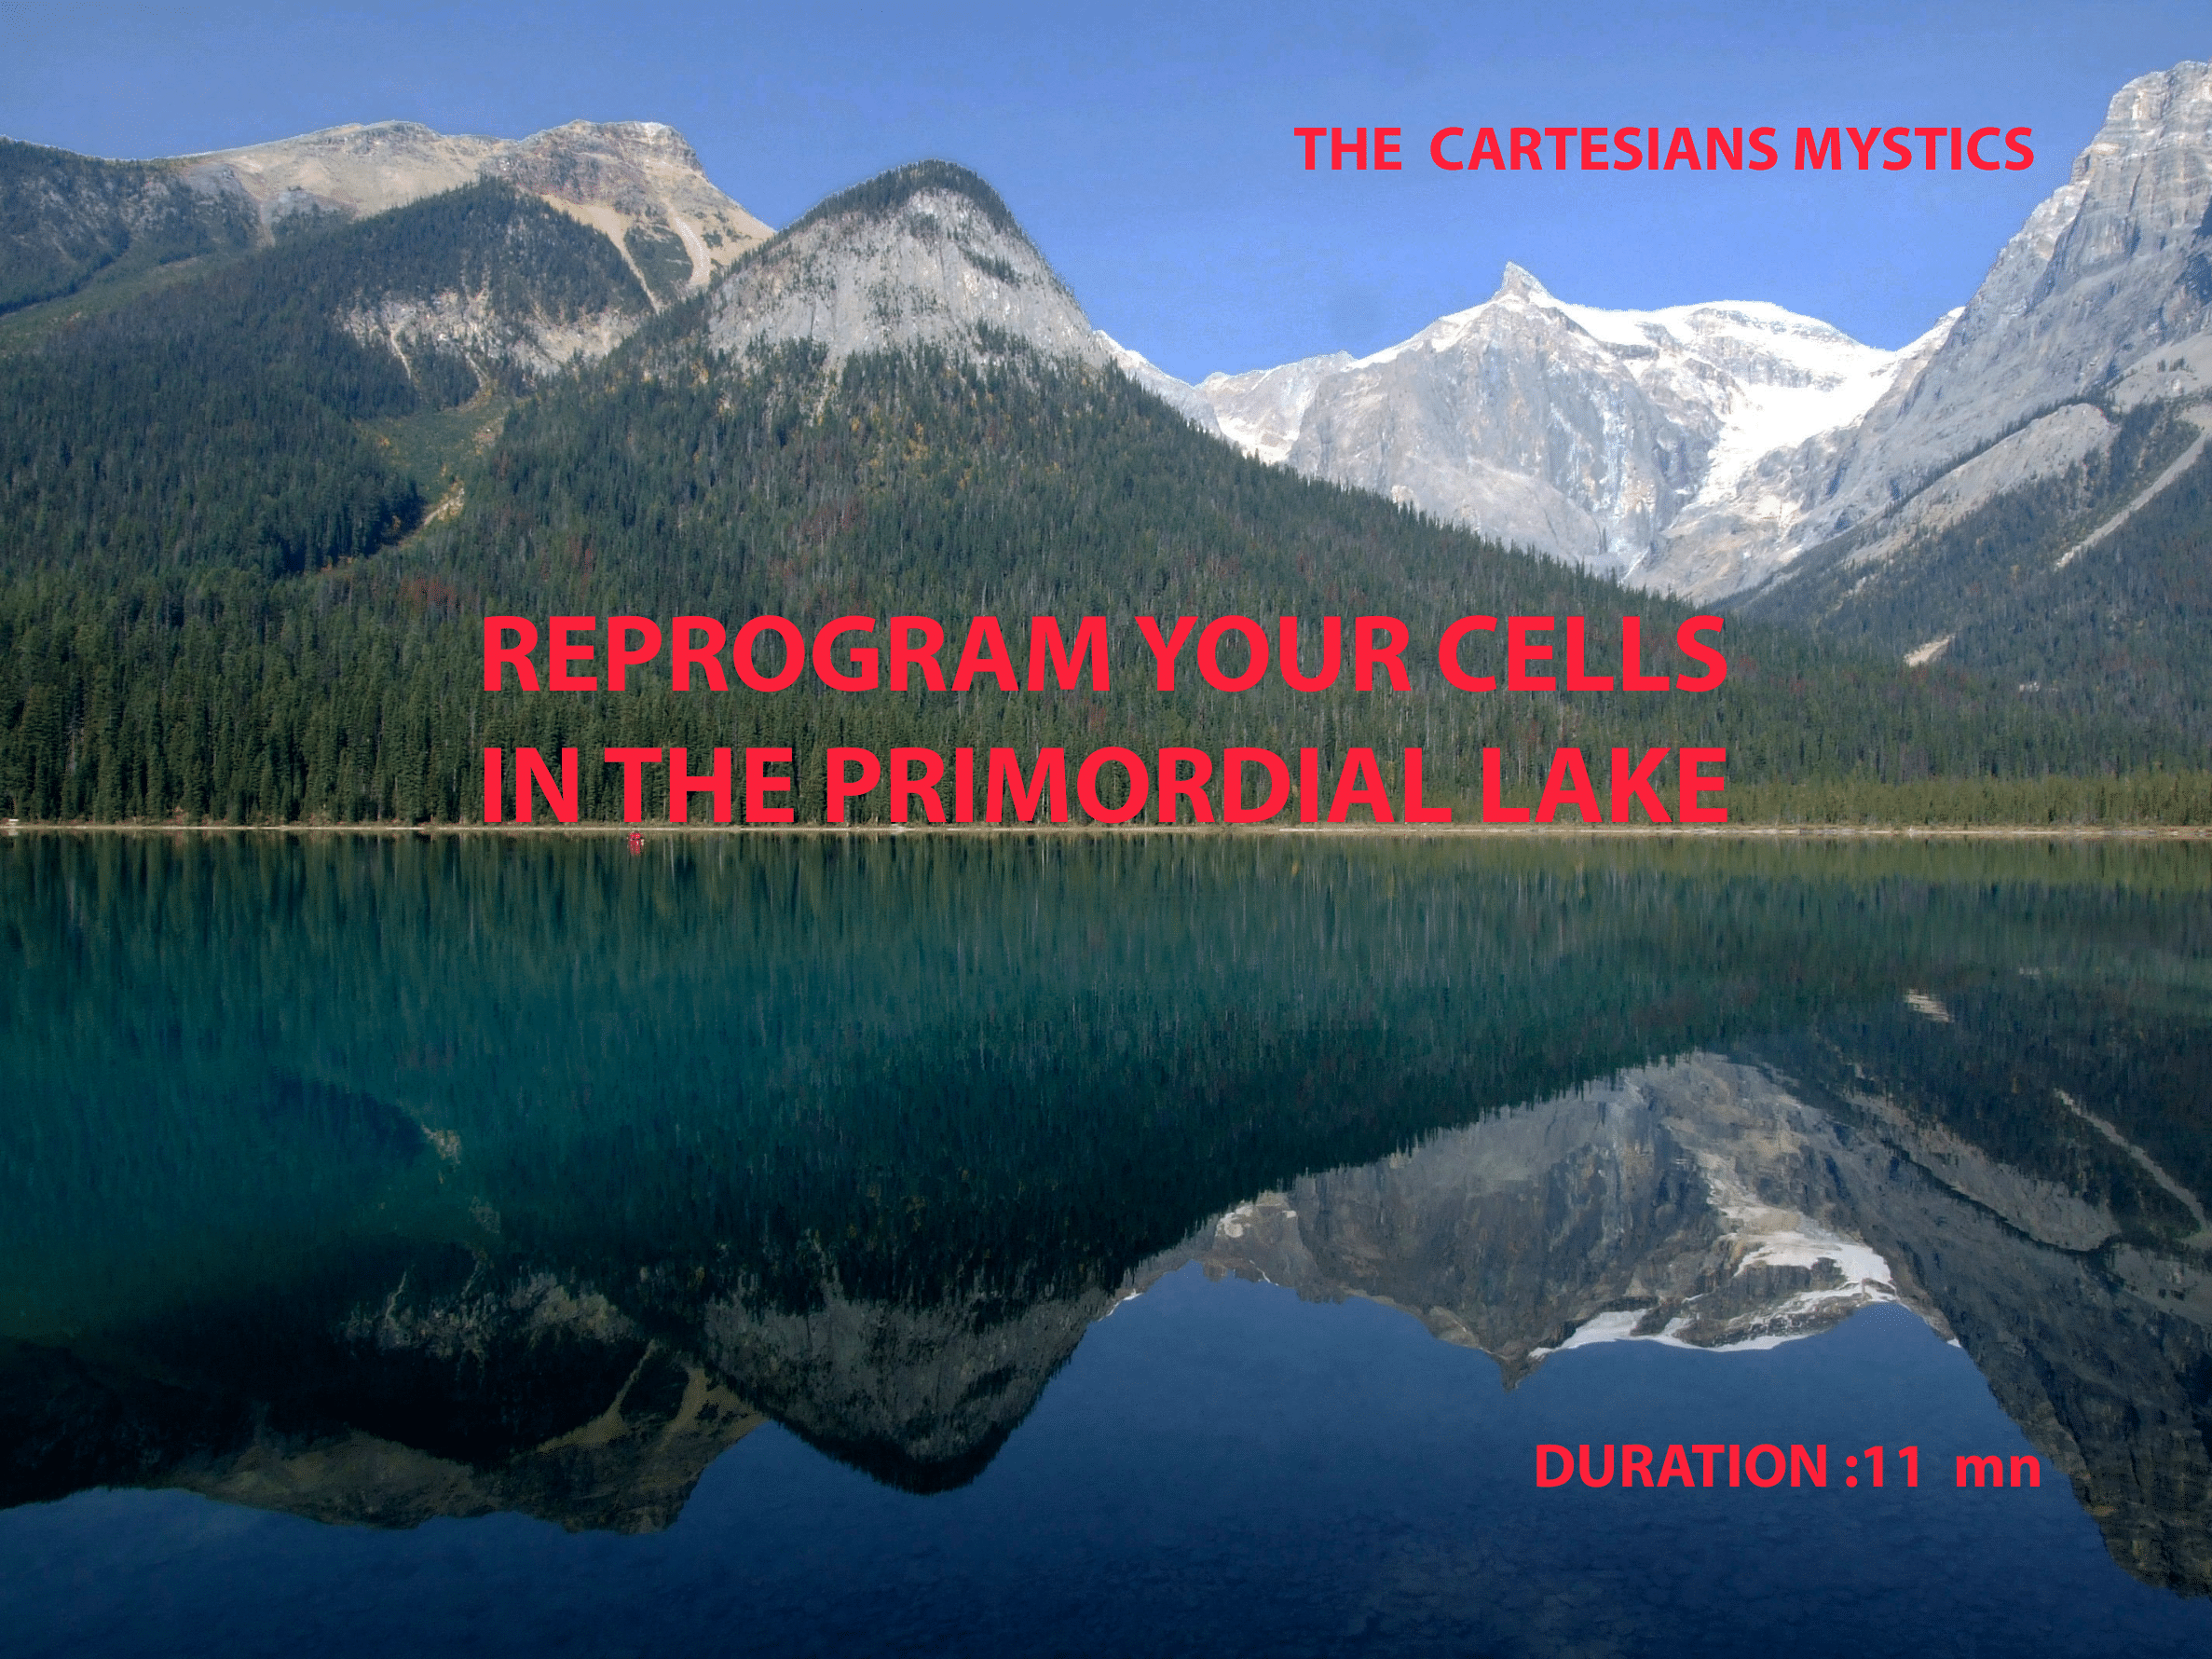 MEDITATION N ° 14: REPROGRAM YOUR CELLS IN THE PRIMORDIAL LAKE